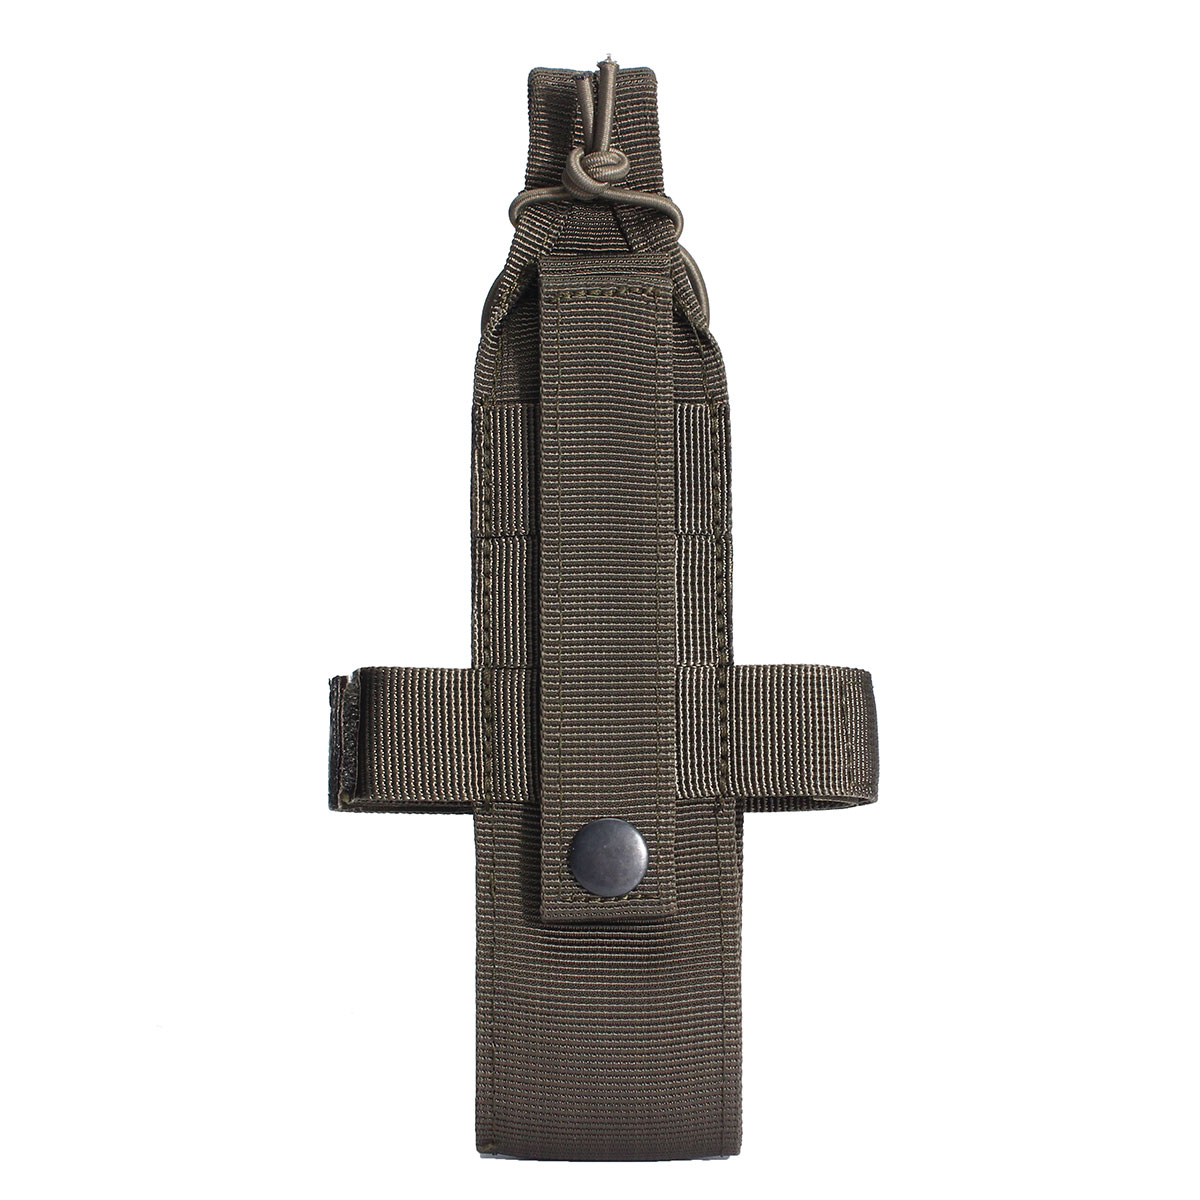 Outdoor-Tactical-Hiking-Camping-Molle-Water-Bottle-Holder-With-Adjustable-Vecro-Strap-Belt-Bottle-Ca-1056939-3